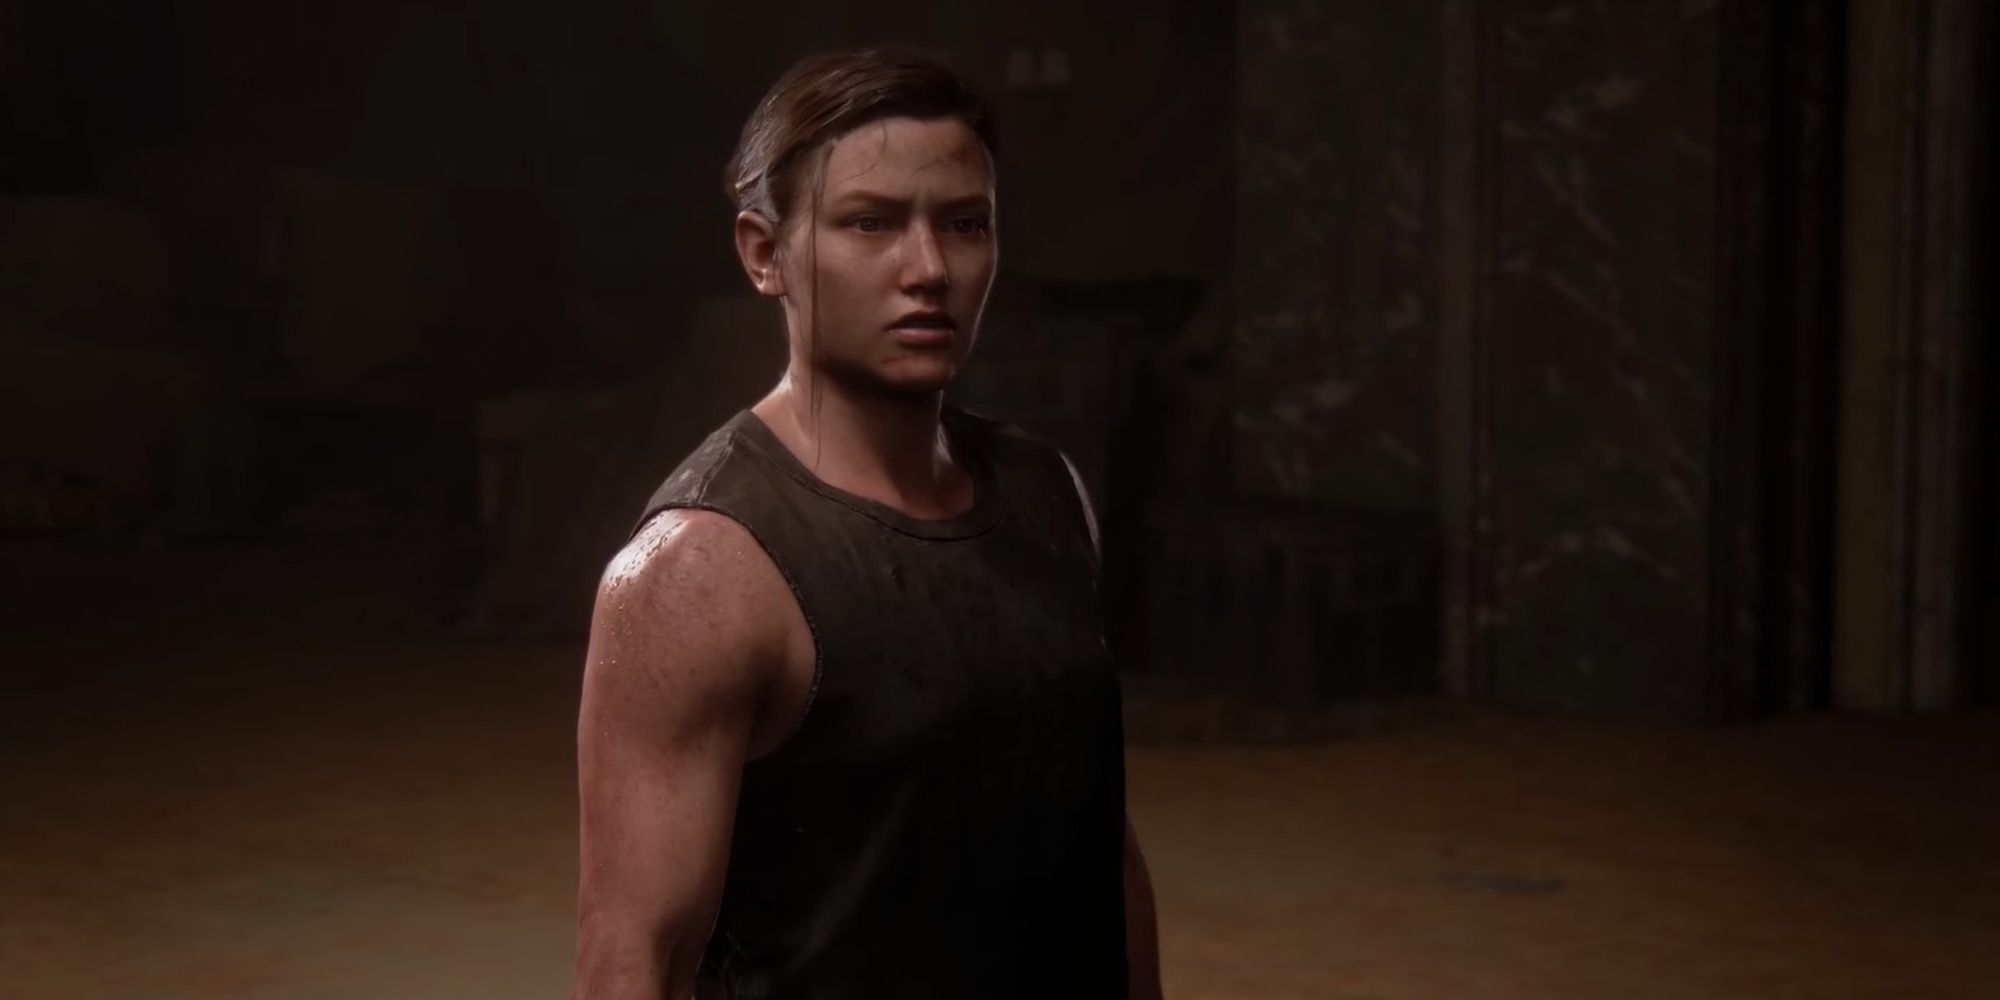 Abby Starring In Last Of Us Part 3 Just Makes Sense